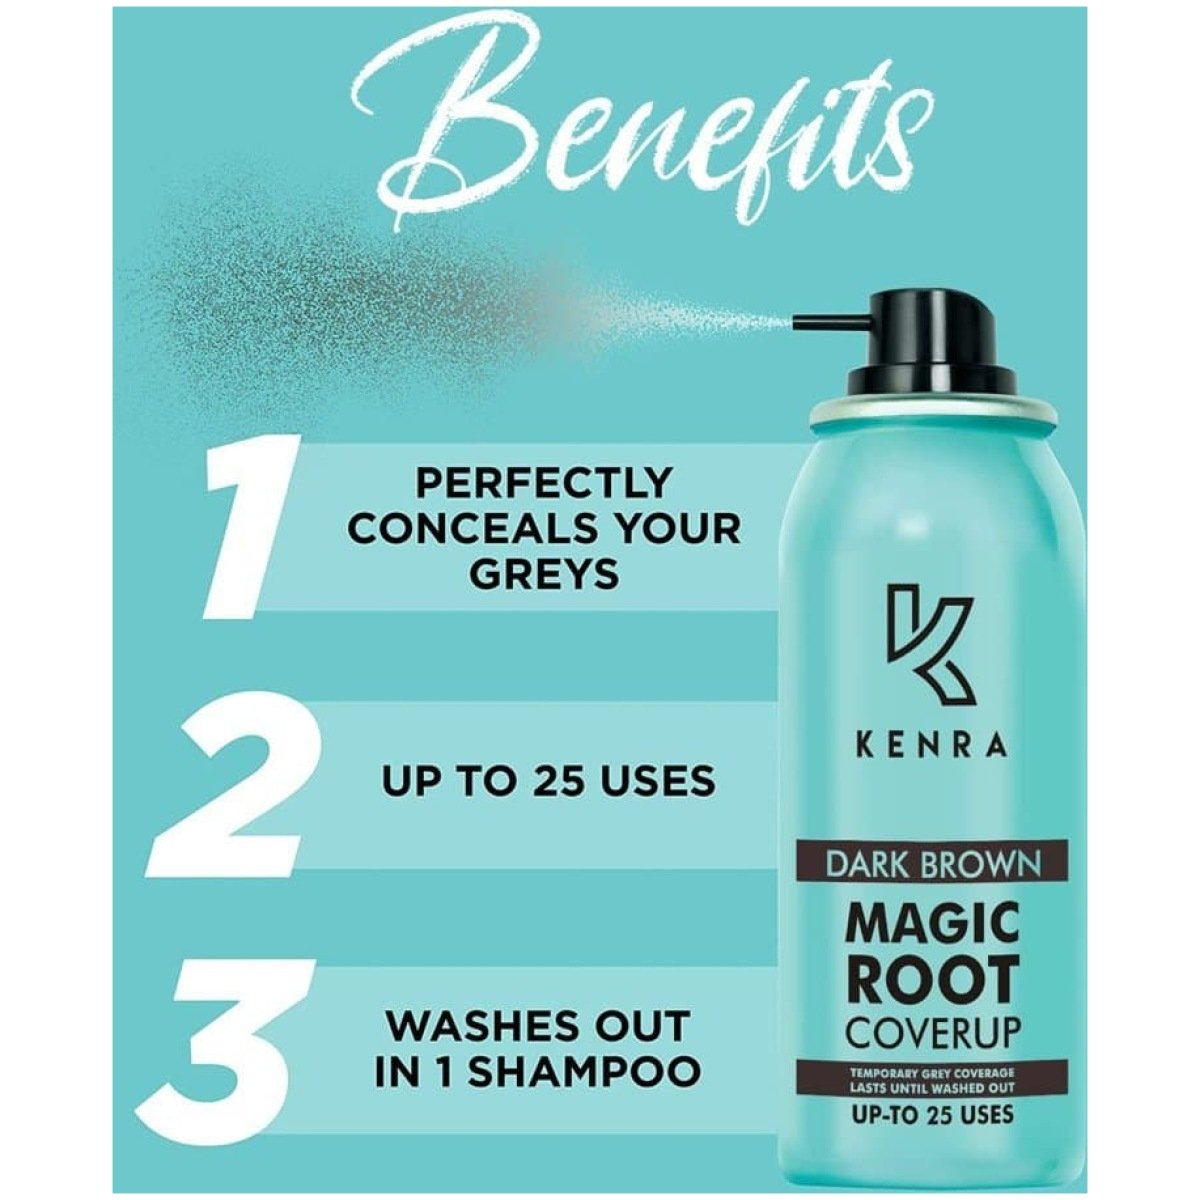 Kenra Magic Retouch Temporary Root Touch Up Hair Colour Spray 75ml Dark Brown